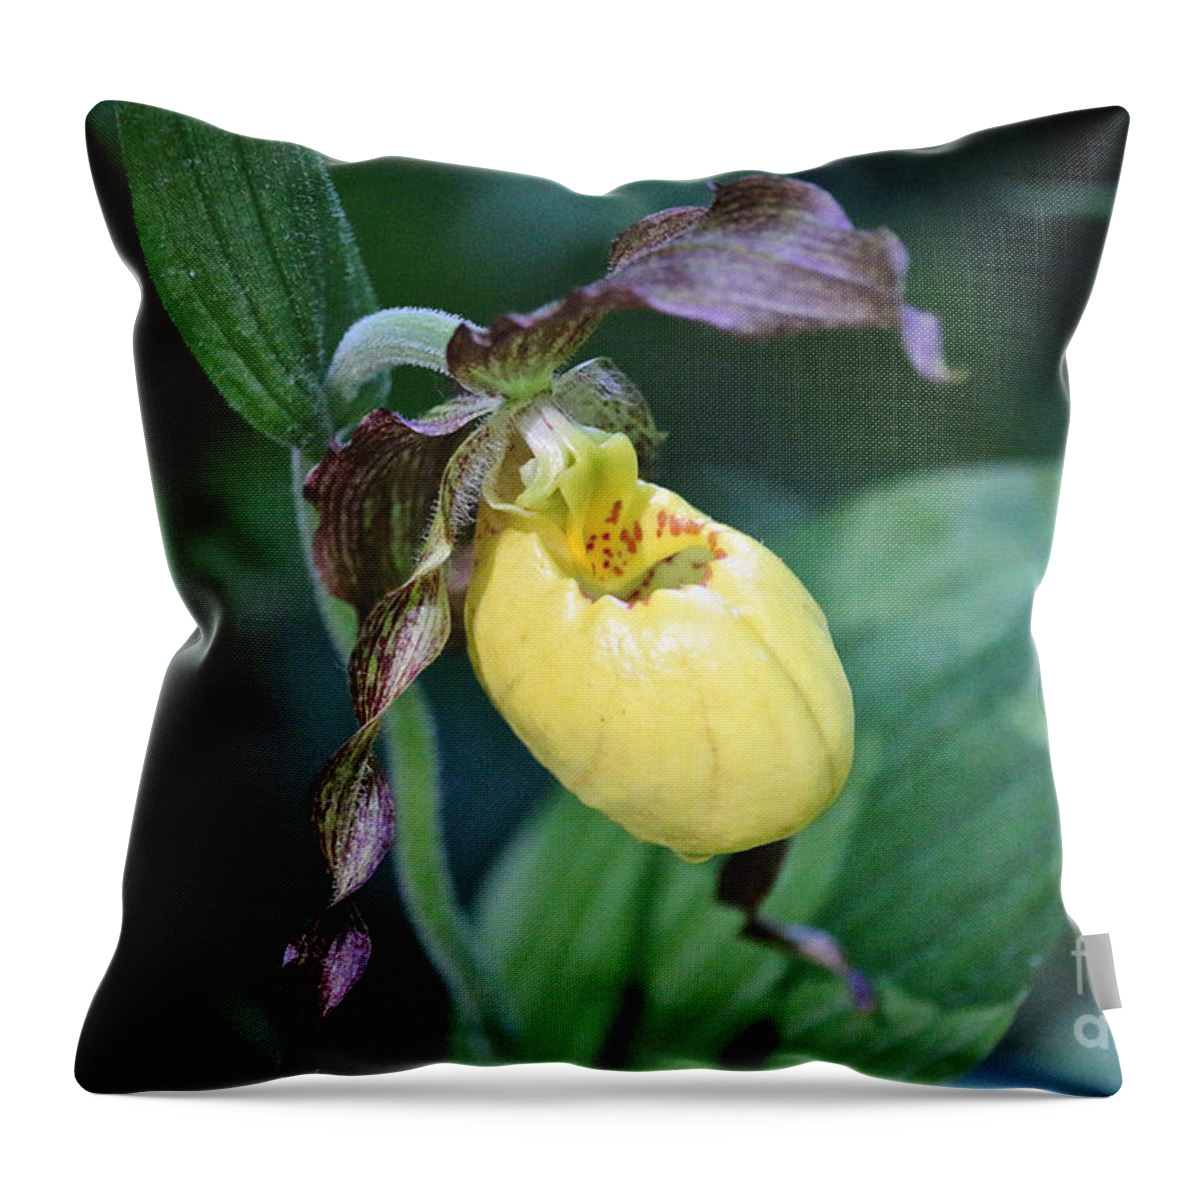 Flower Throw Pillow featuring the photograph Sunny Slipper Tear by Susan Herber